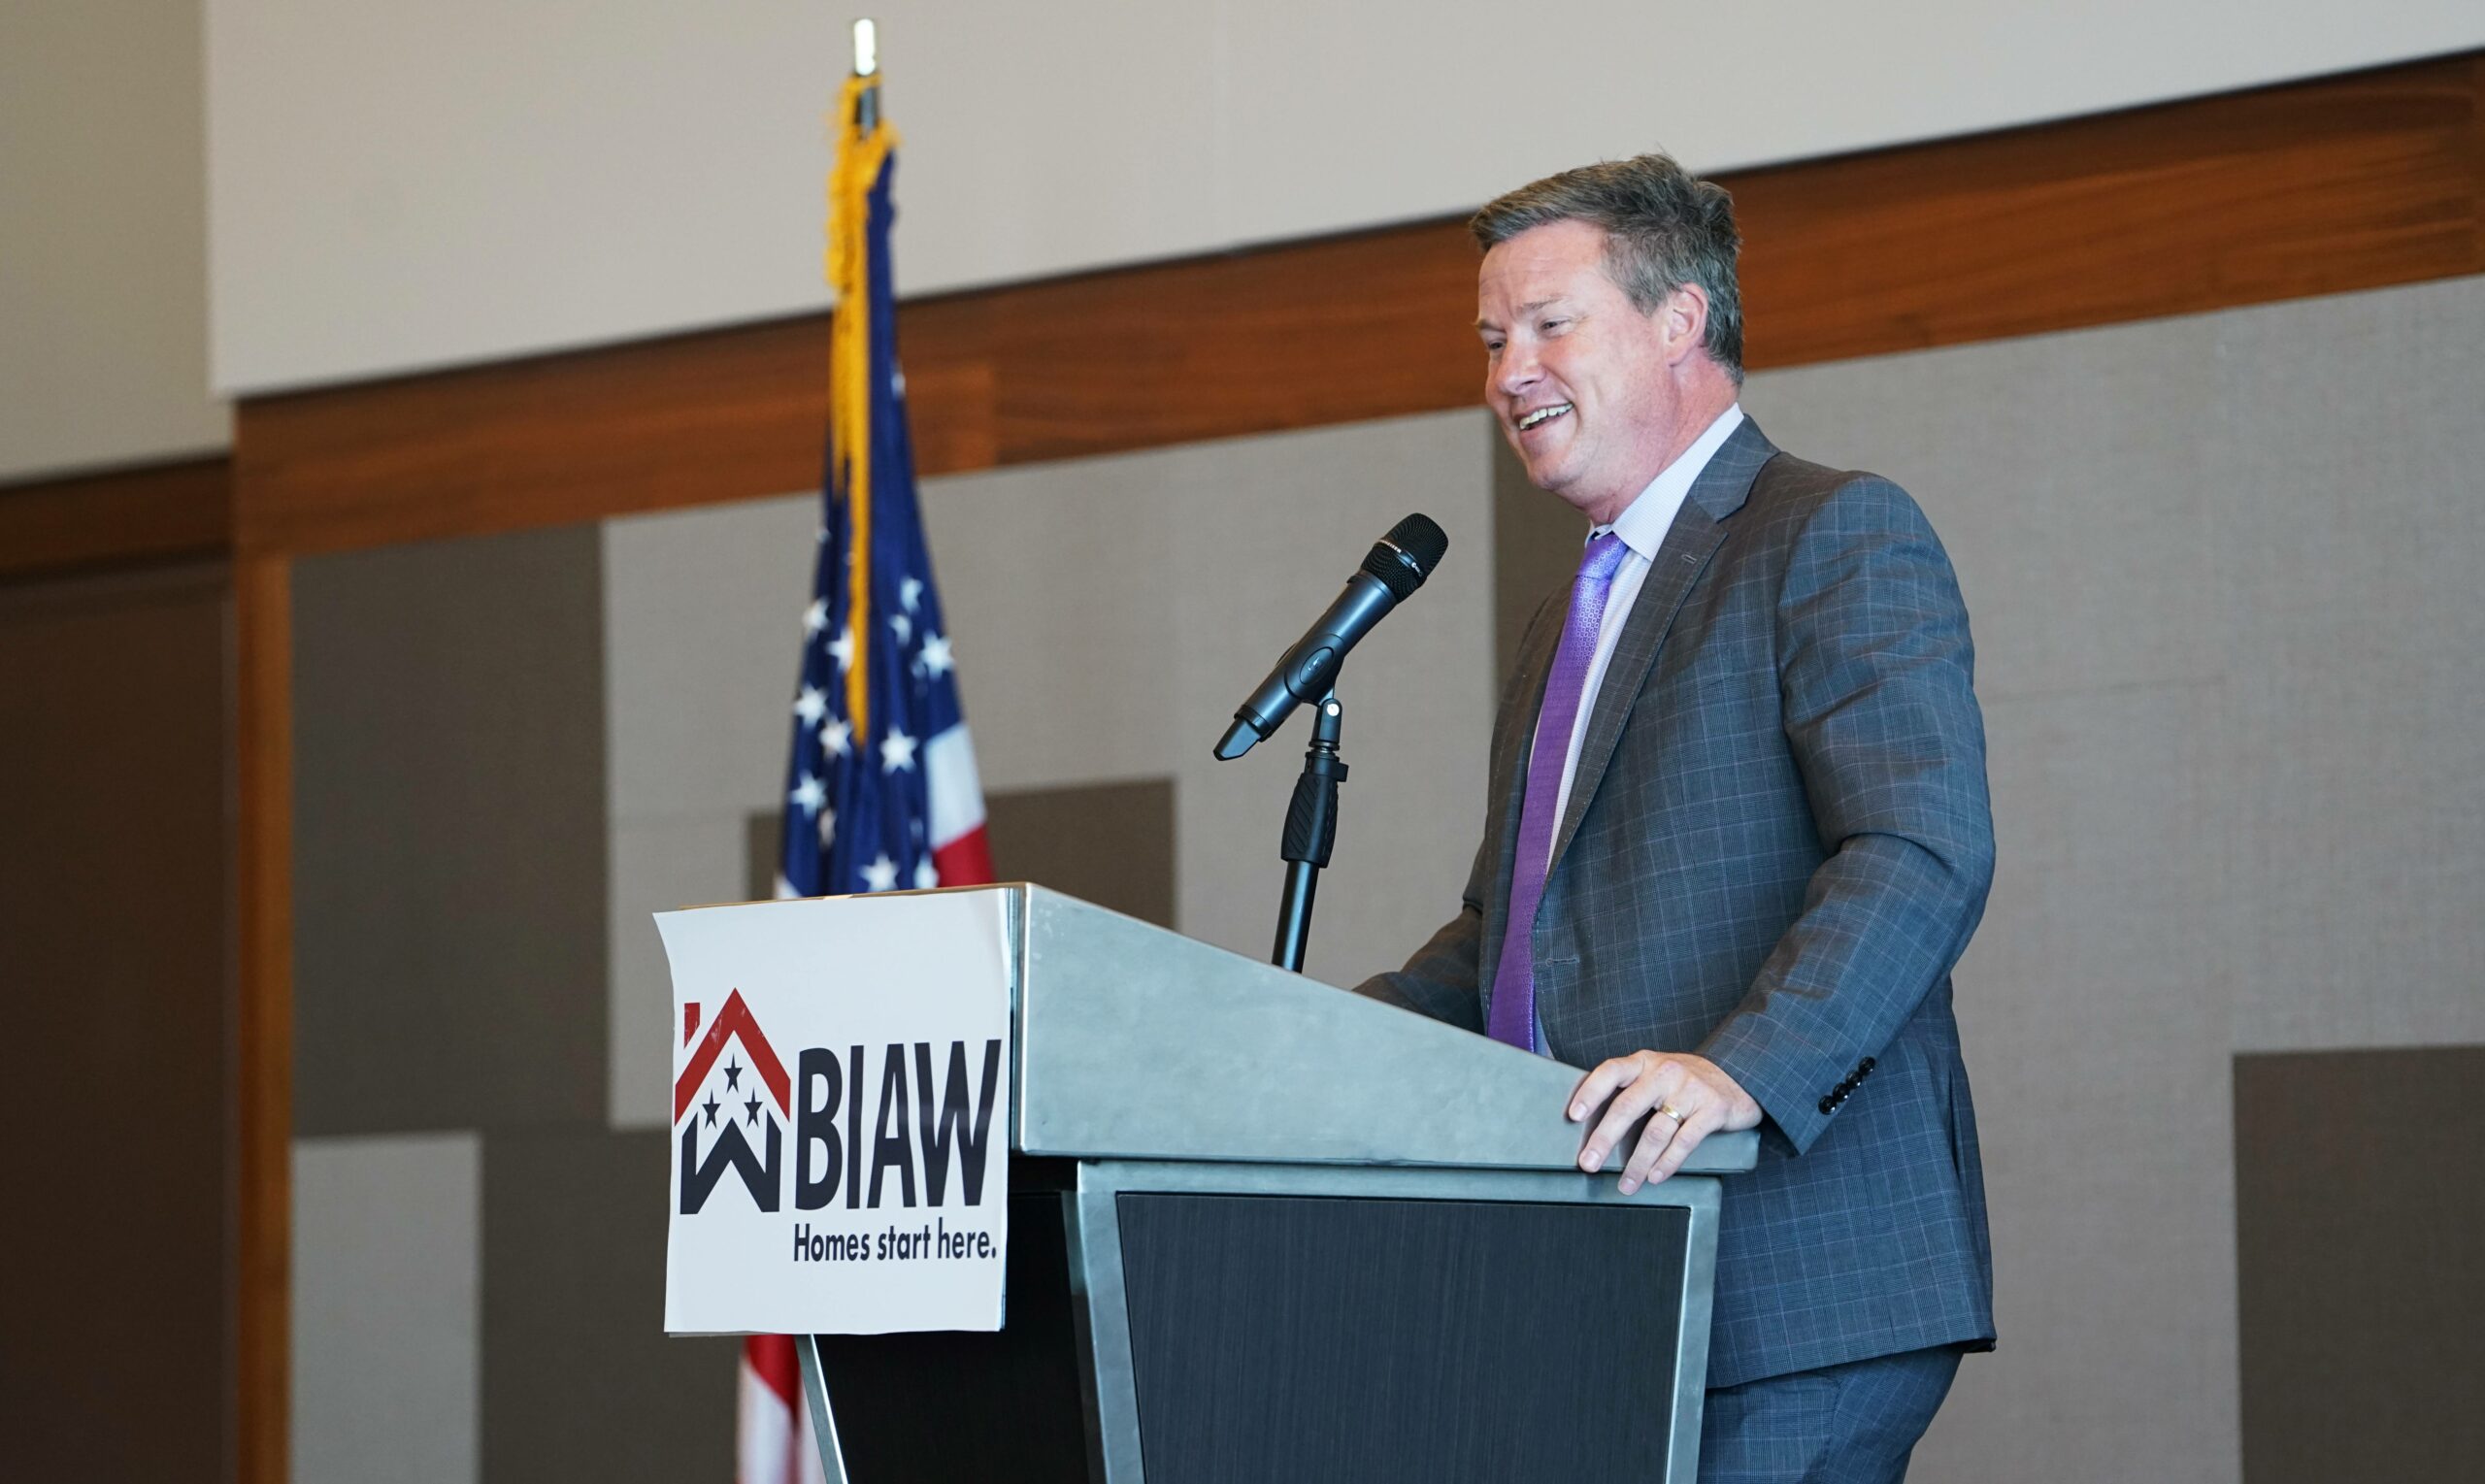 man in gray suit speaks at podium with BIAW podium sign and American flag
